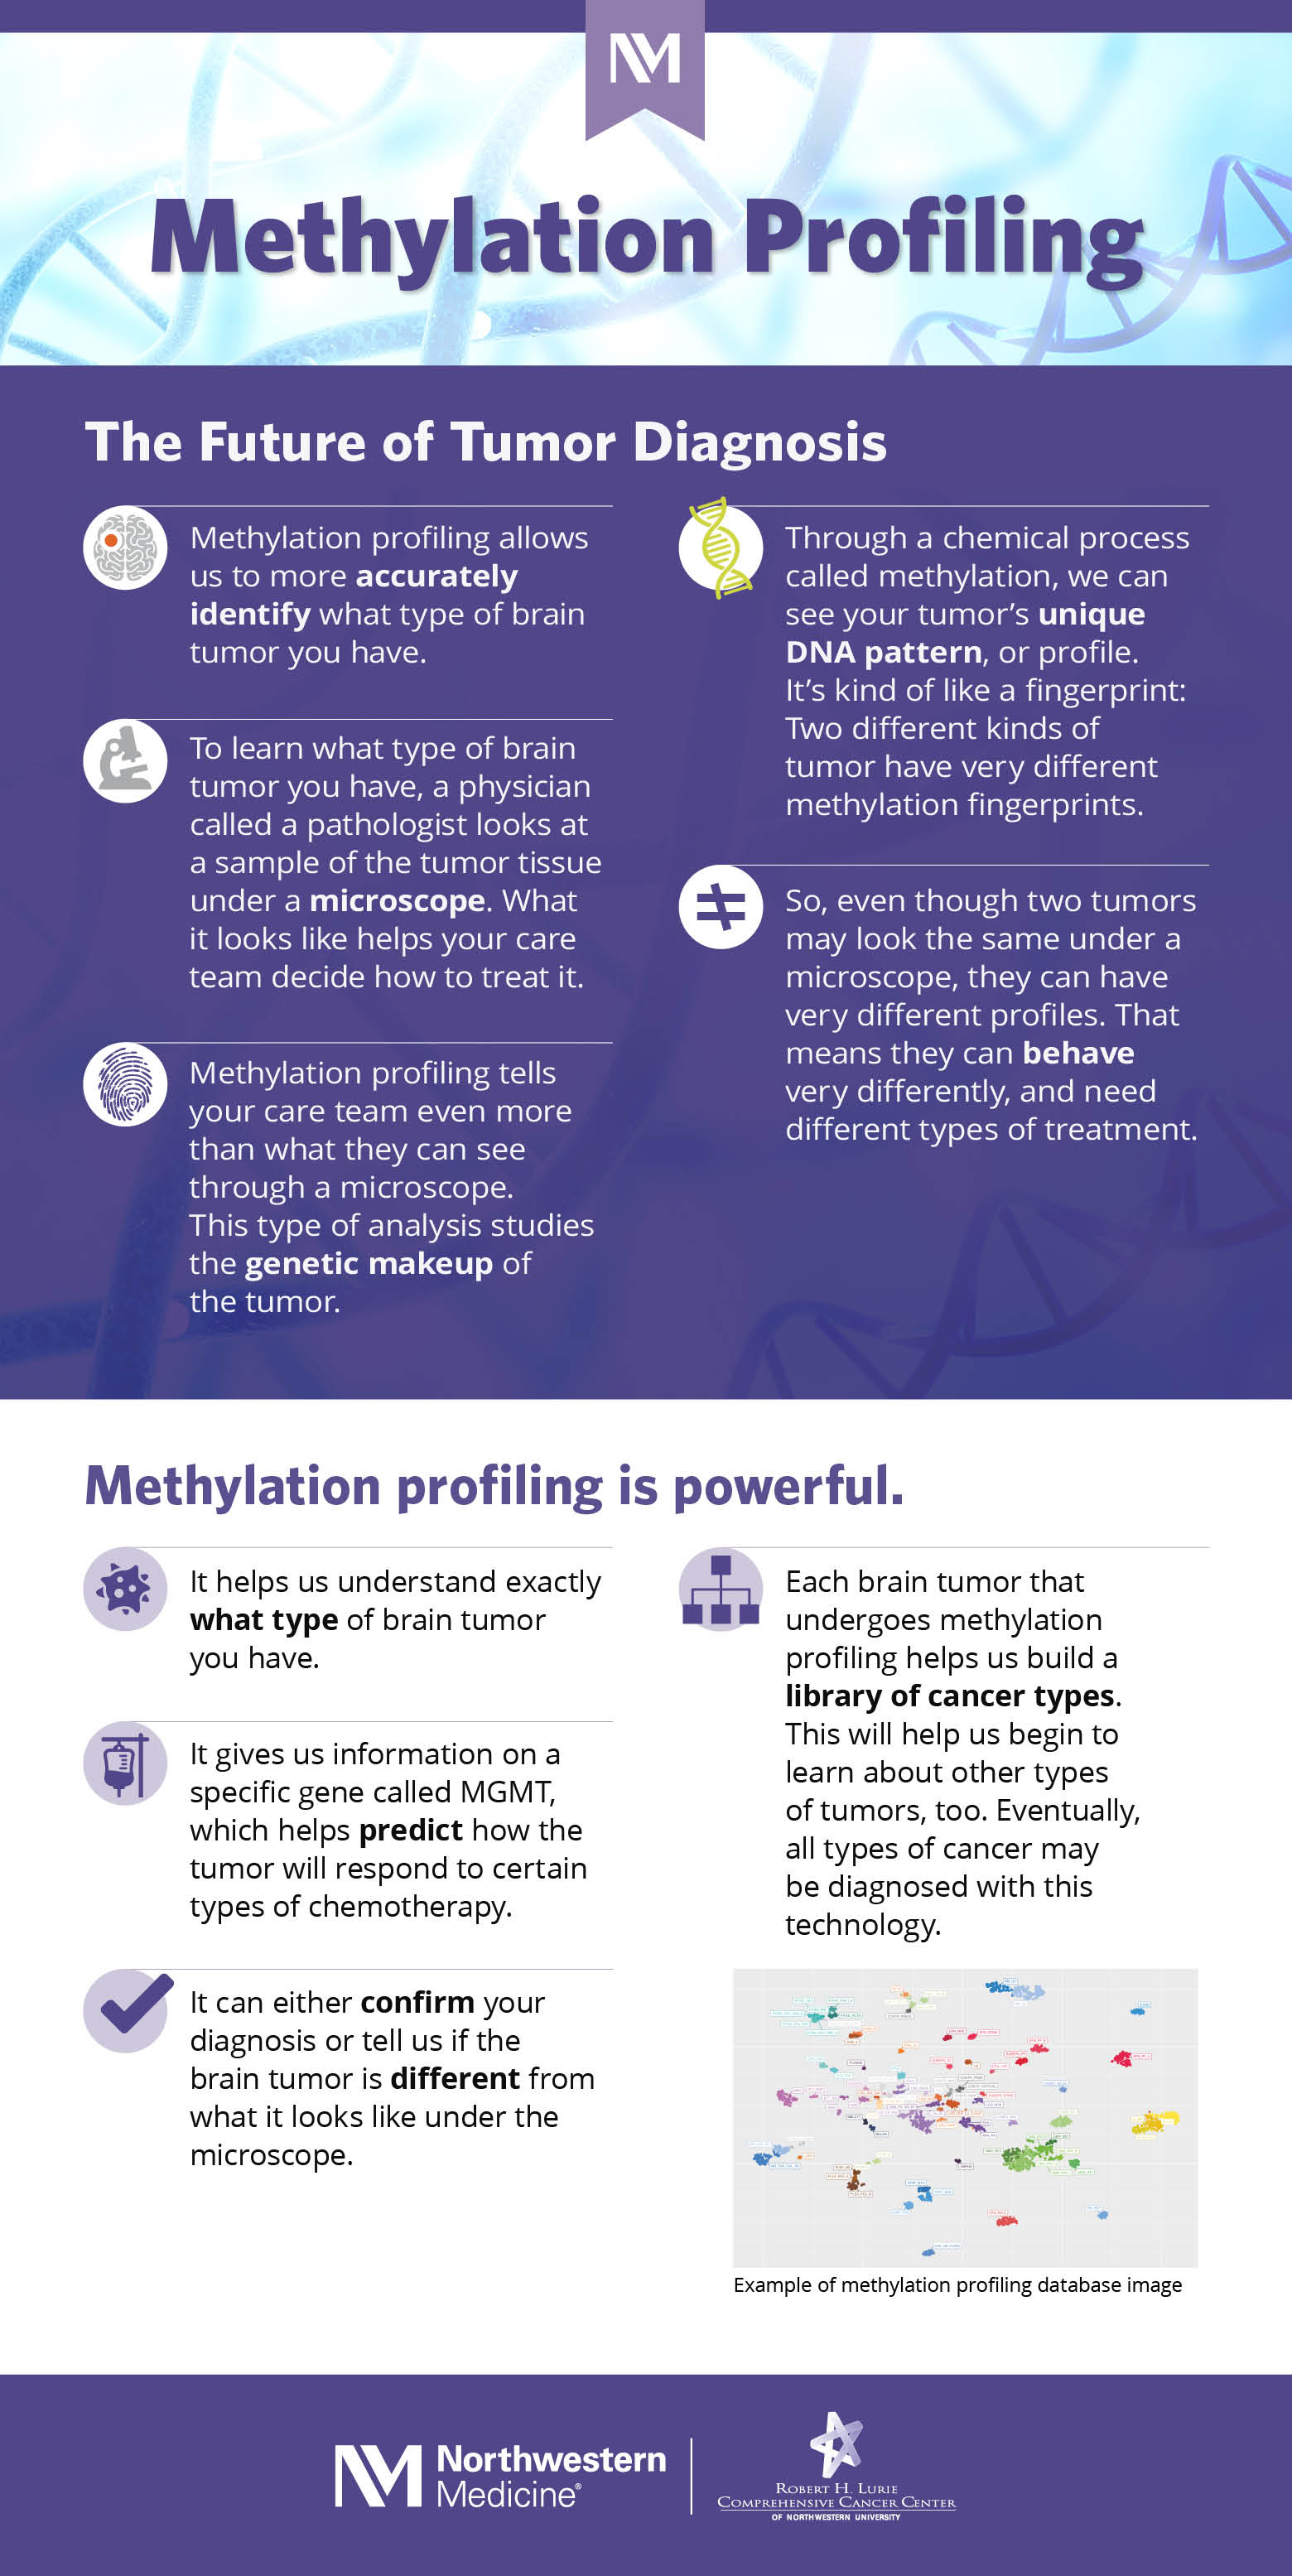 Infographic with title Methylation Profiling and subheadings The Future of Tumor Diagnosis and Methylation profiling is powerful. Includes example of methylation profiling database image.